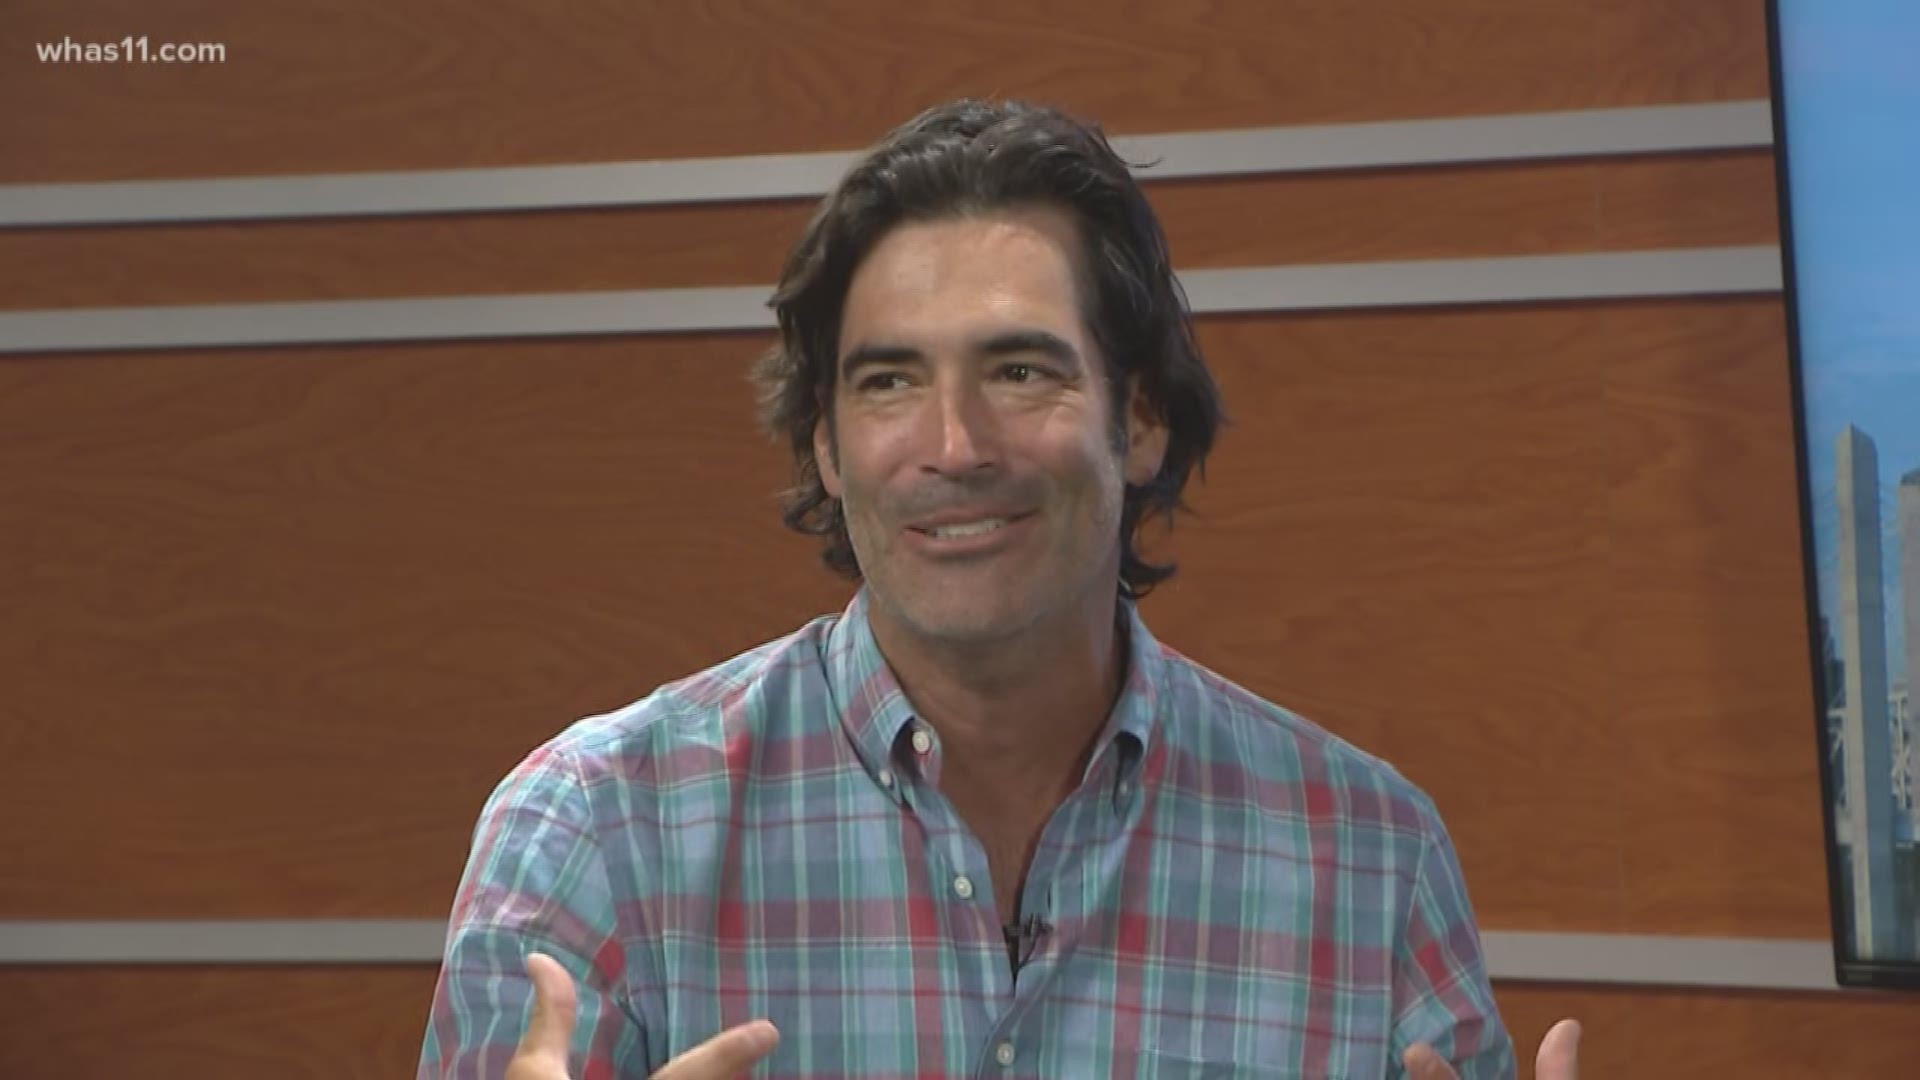 The popular "Trading Spaces" star Carter Oosterhouse came to WHAS11to talk about two playgrounds built with local community members through his non-profit, Carter's Kids.